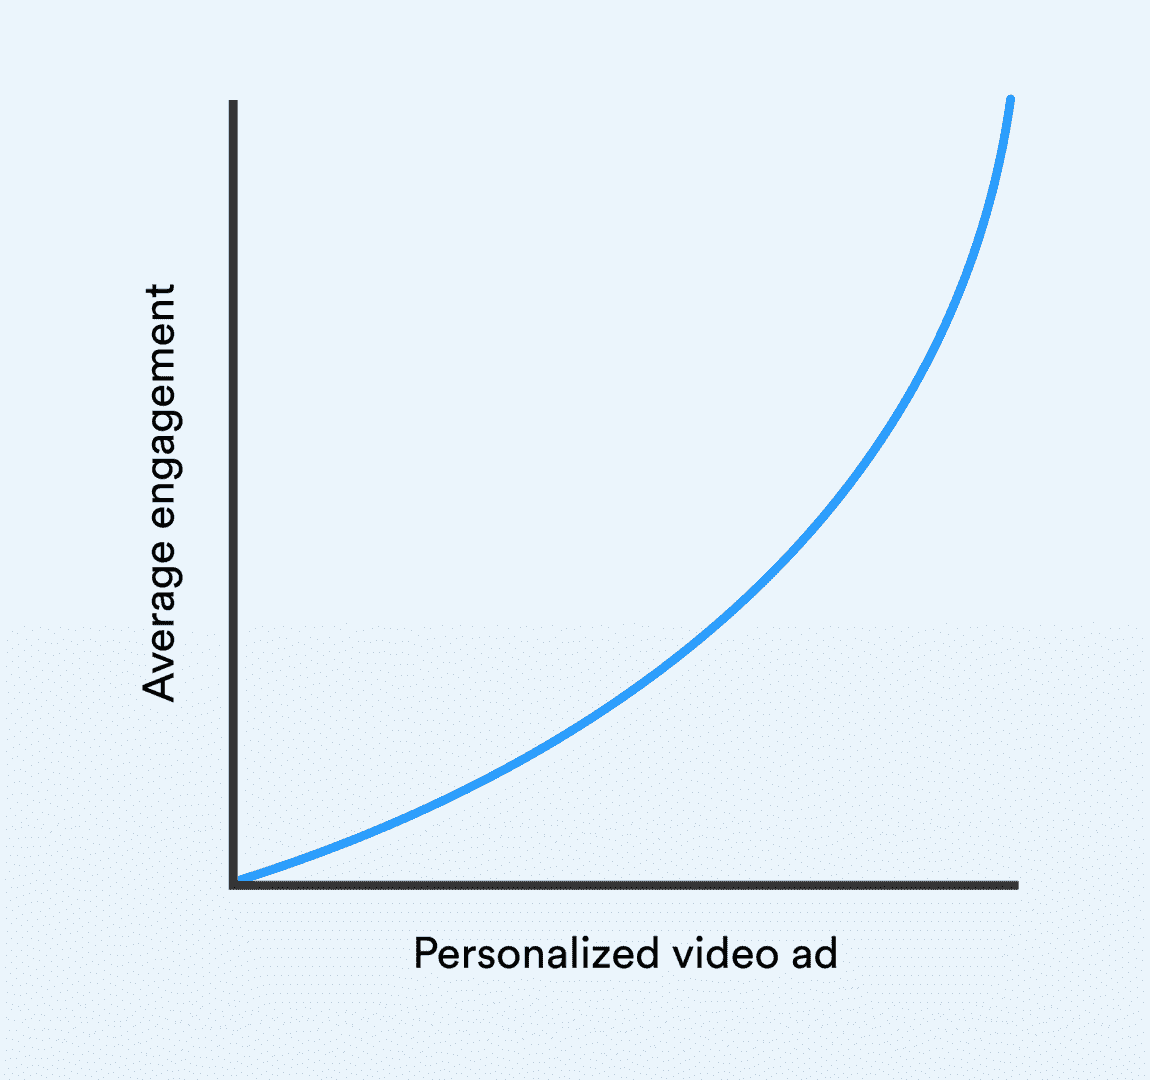 The higher the degree of personalization within an advertising video, the higher the average engagement.